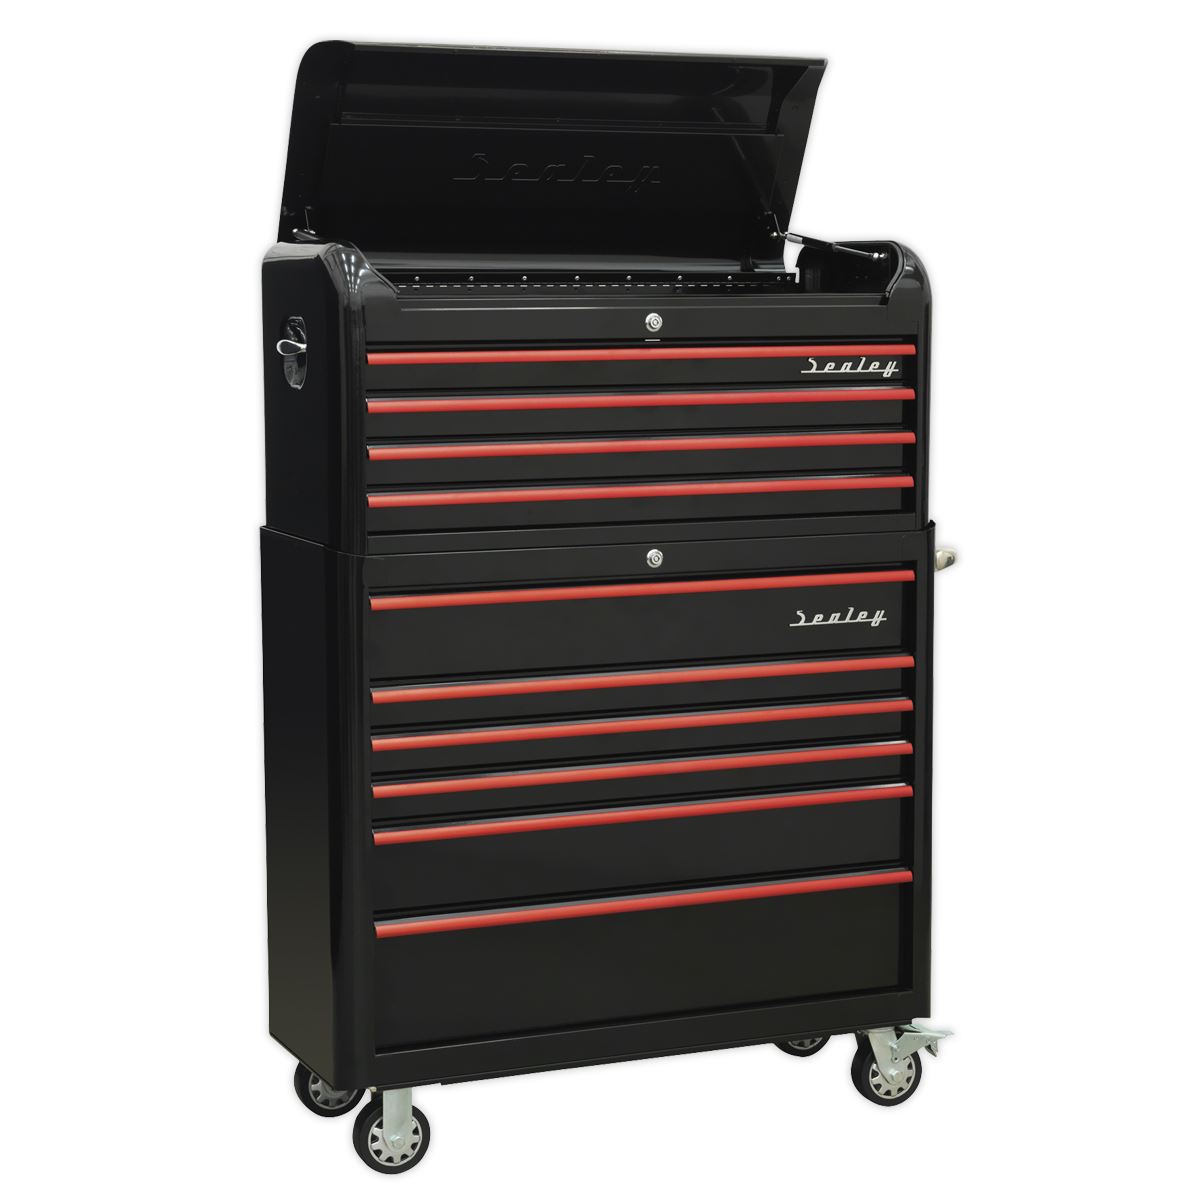 Sealey Premier Retro Style Wide Topchest & Rollcab Combination 10 Drawer-Black with Red Anodised Drawer Pull